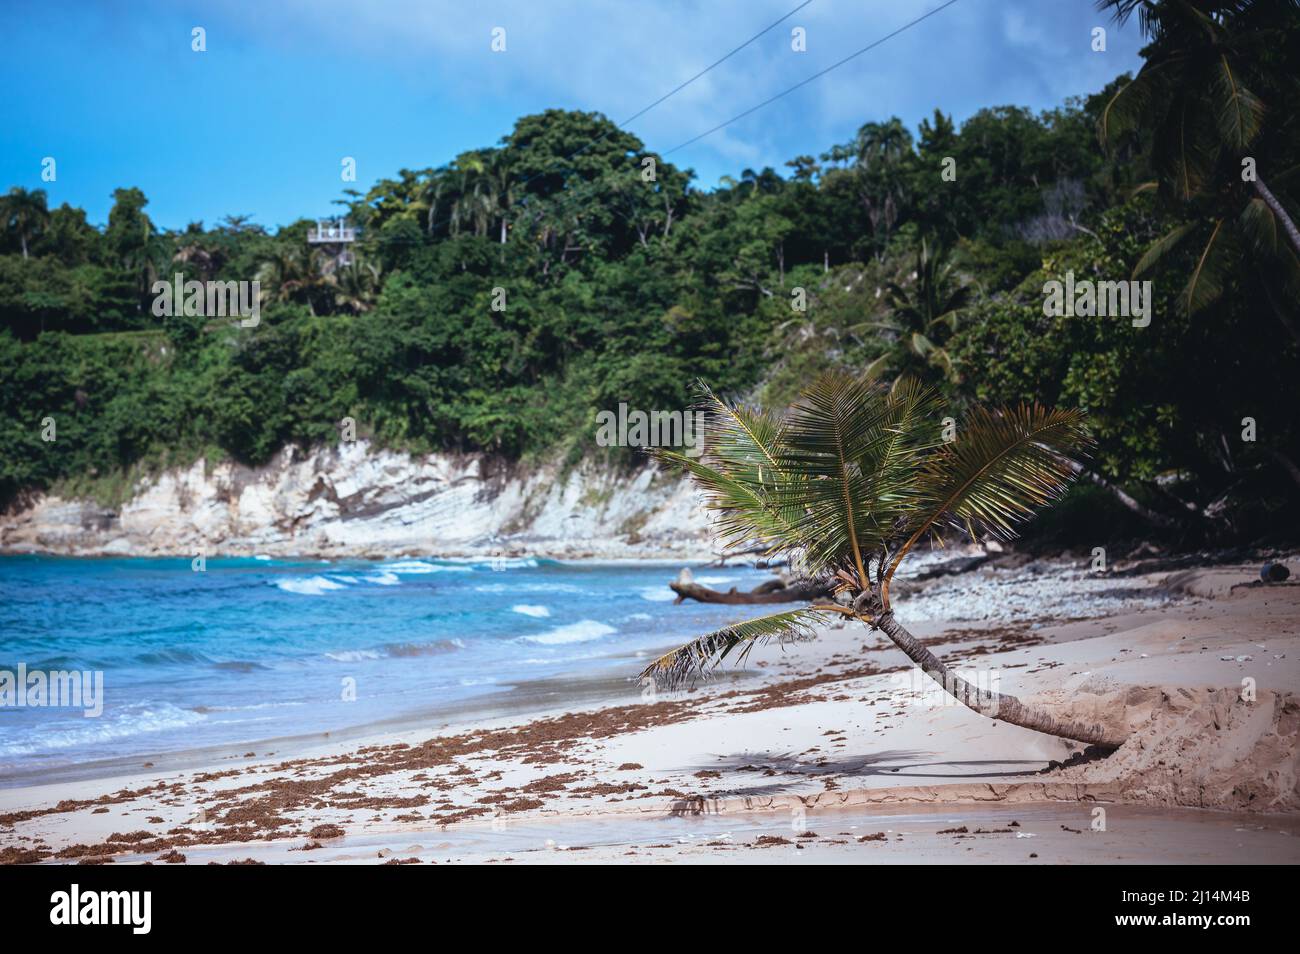 Photo of a sandy beach in the foreground from the Dominican Republic. The picture clearly shows the magnificent sand from the Atlantic Ocean and the b Stock Photo